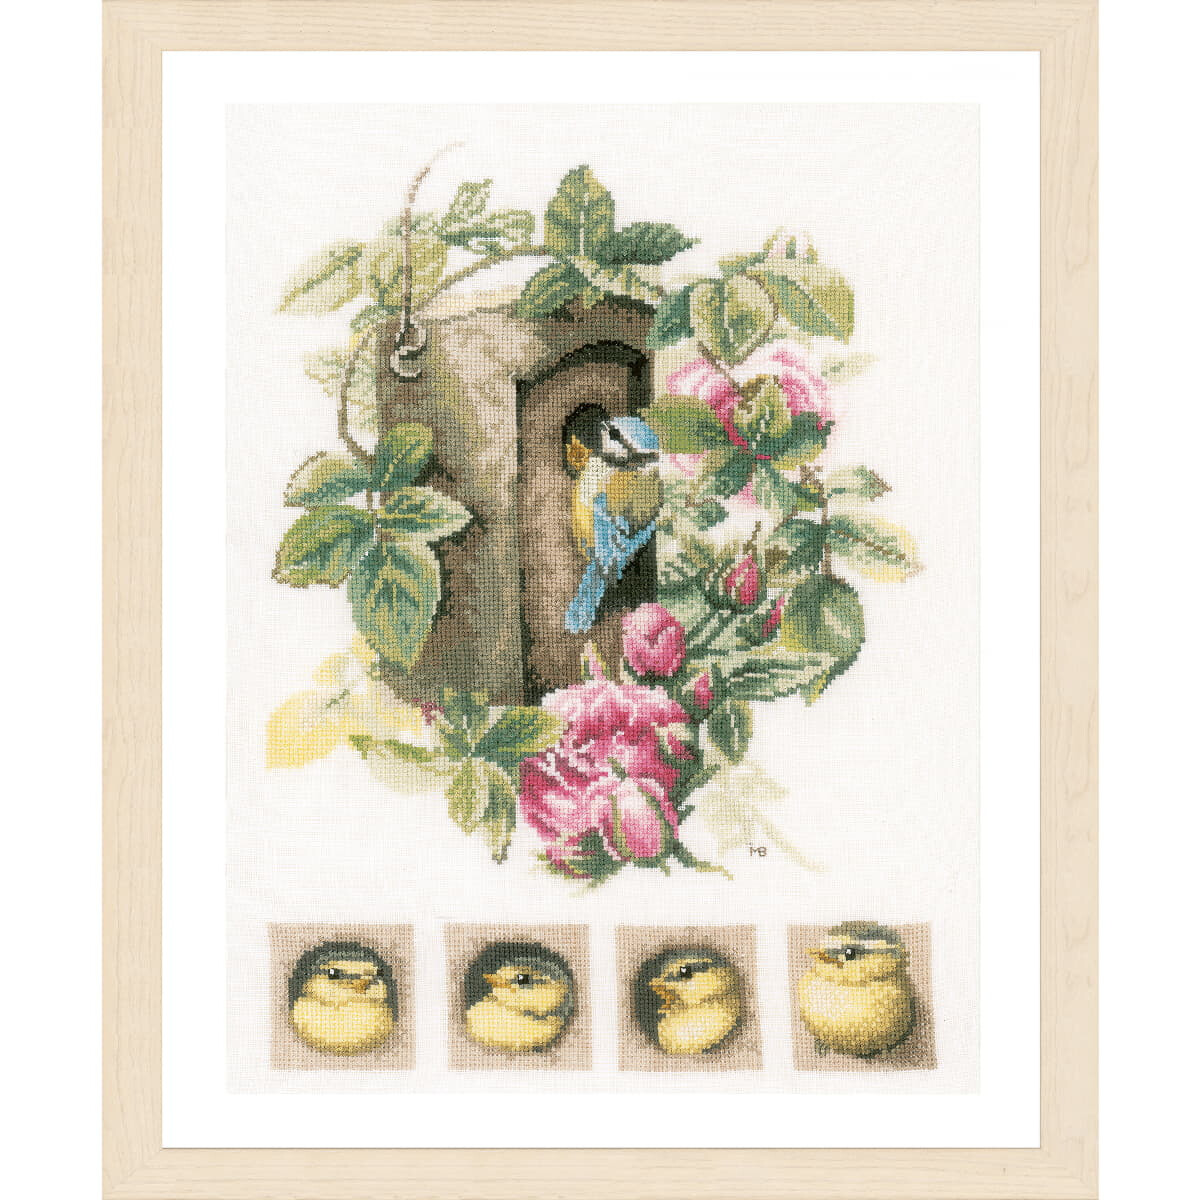 Lanarte counted cross stitch kit "Birdhouse with...